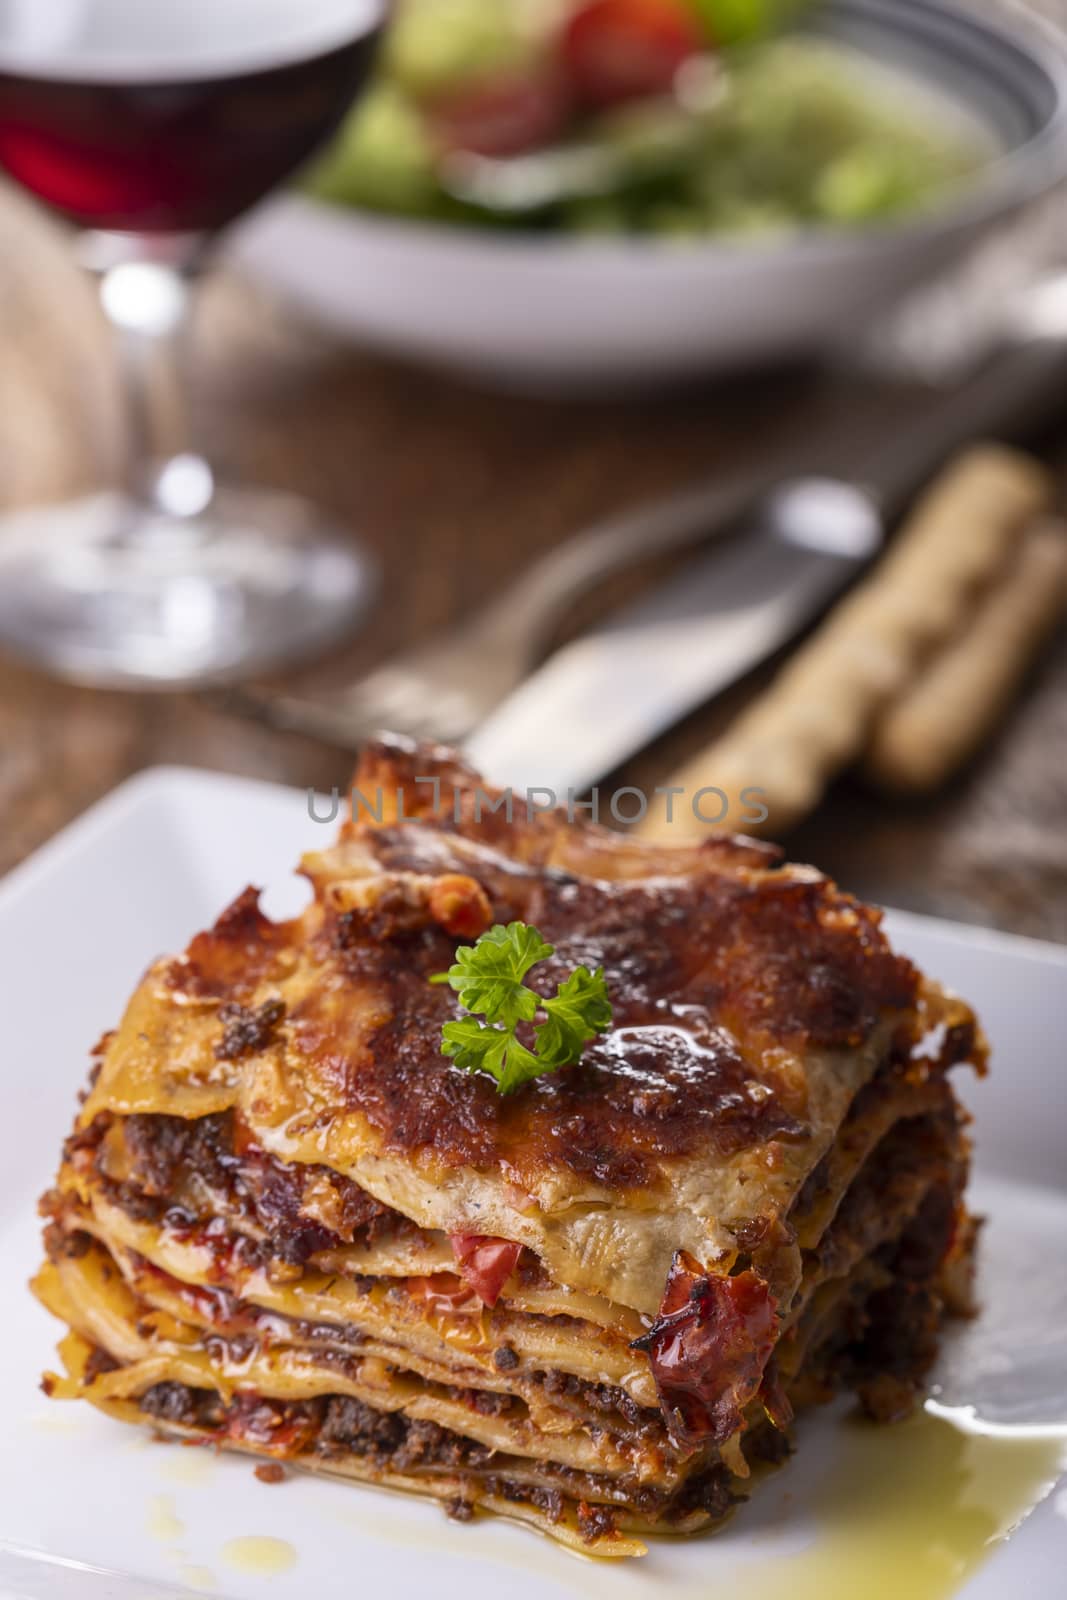 portion of lasagna on a plate by bernjuer